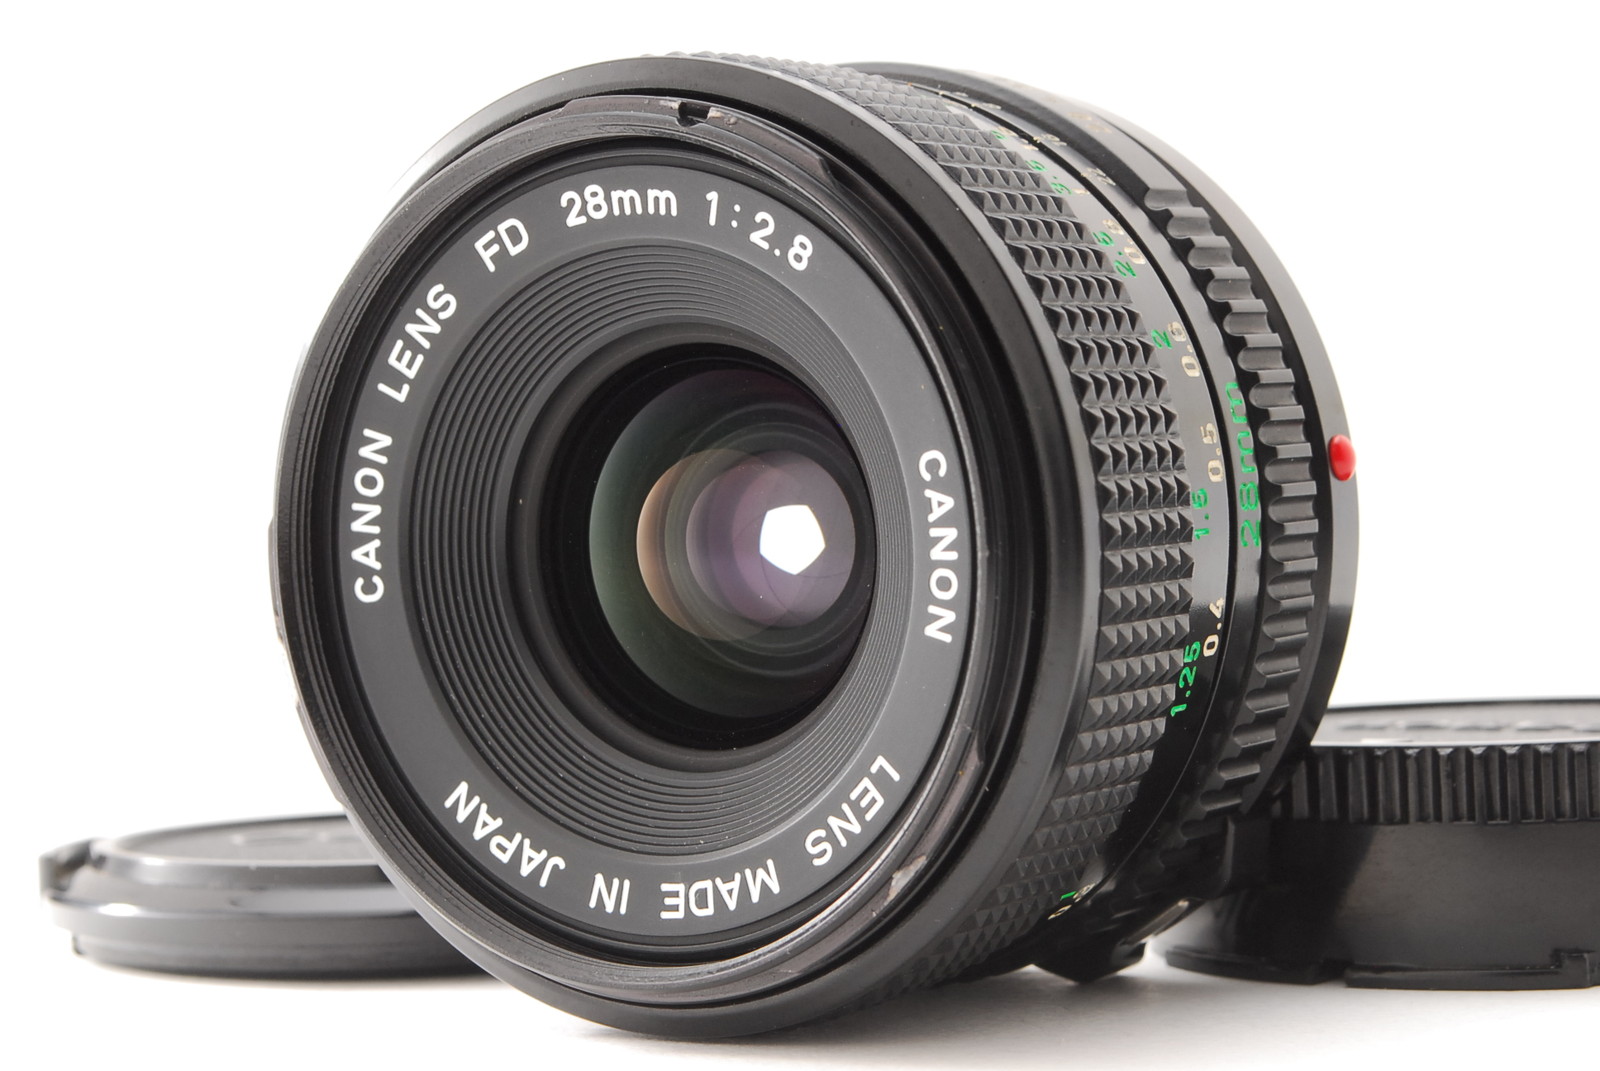 PROMOTION. NEAR MINT Canon New FD 28mm f/2.8, Front Cap, Rear Cap Wide Angle Manual Focus Lens from Japan